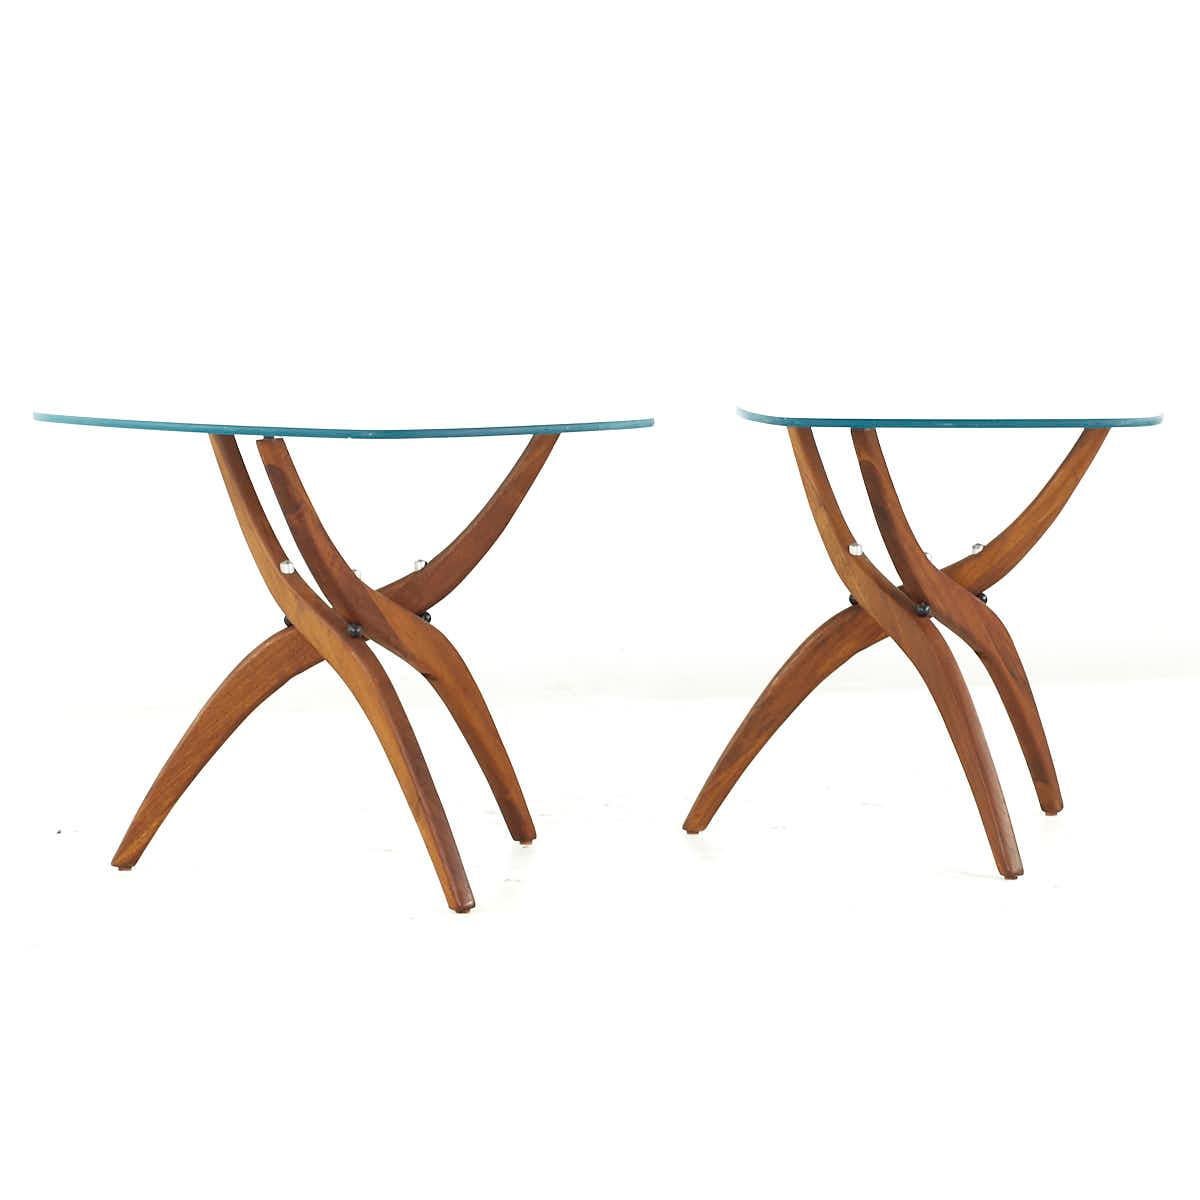 Forest Wilson Mid Century Walnut Side Tables – Pair

Each side table measures: 27 wide x 19.75 deep x 20.75 inches high

All pieces of furniture can be had in what we call restored vintage condition. That means the piece is restored upon purchase so